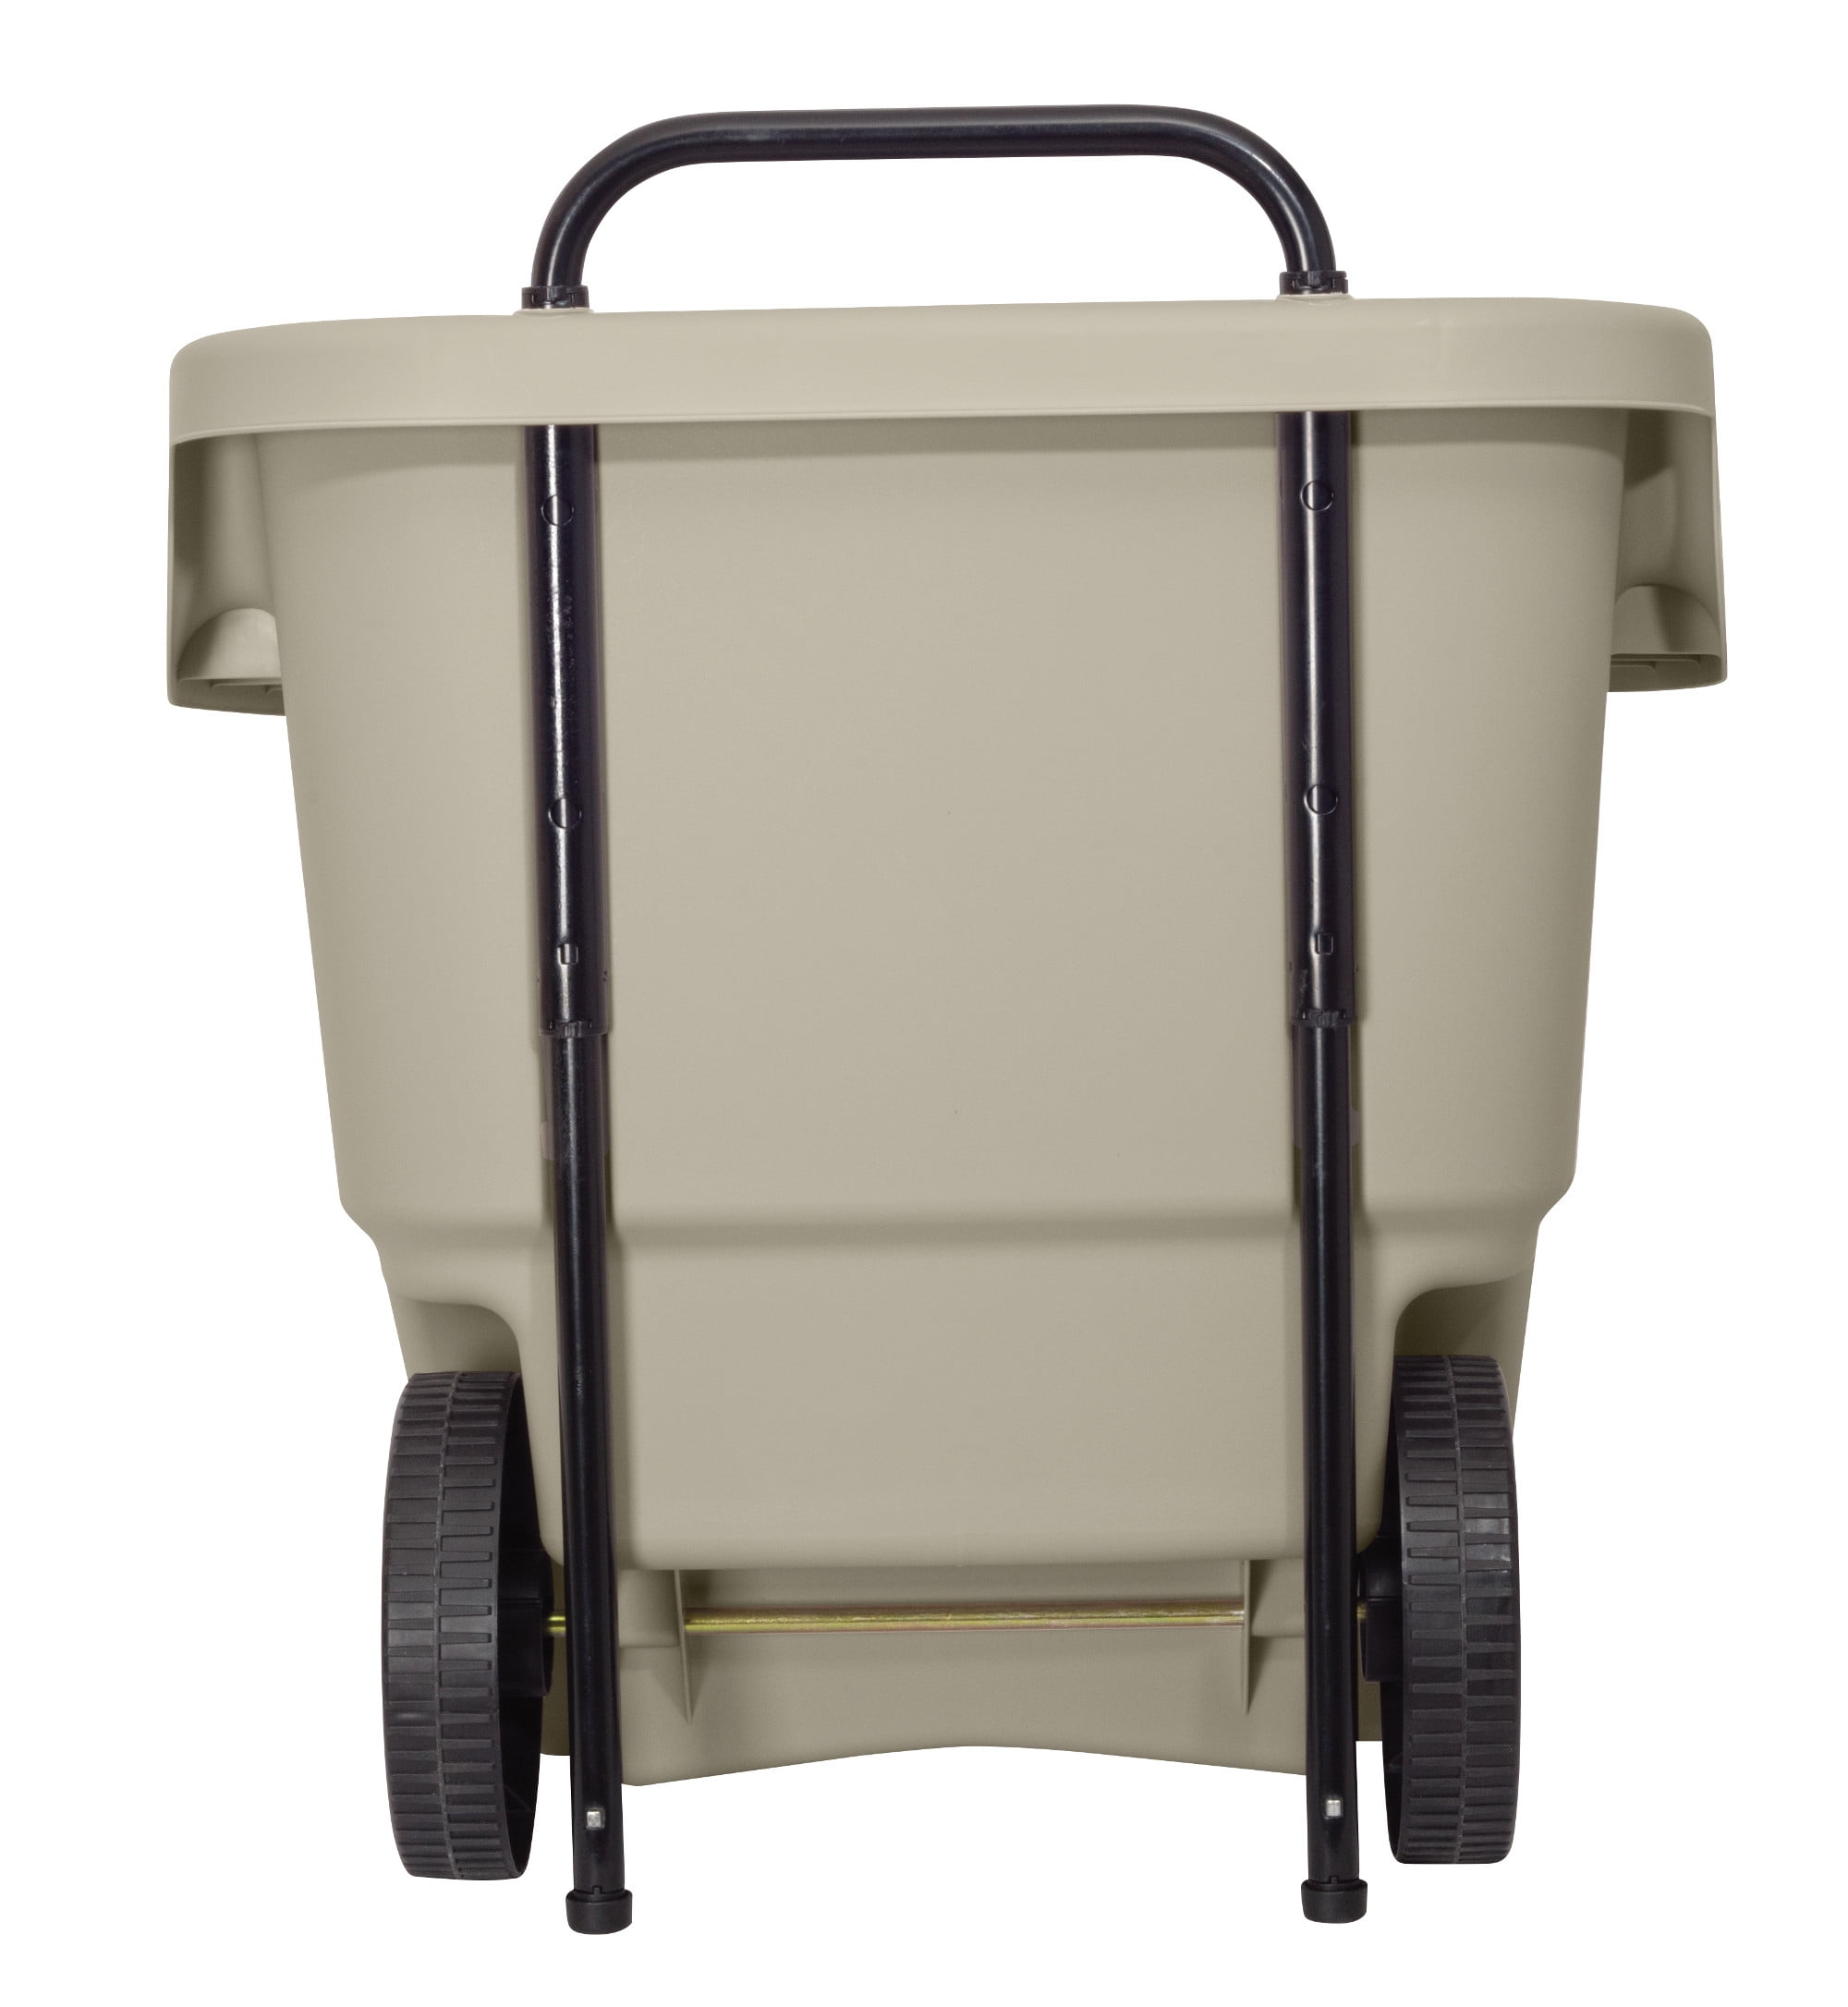 Suncast 15 Gallon Resin Rolling Lawn and Utility Cart with Retractable Handle - 1